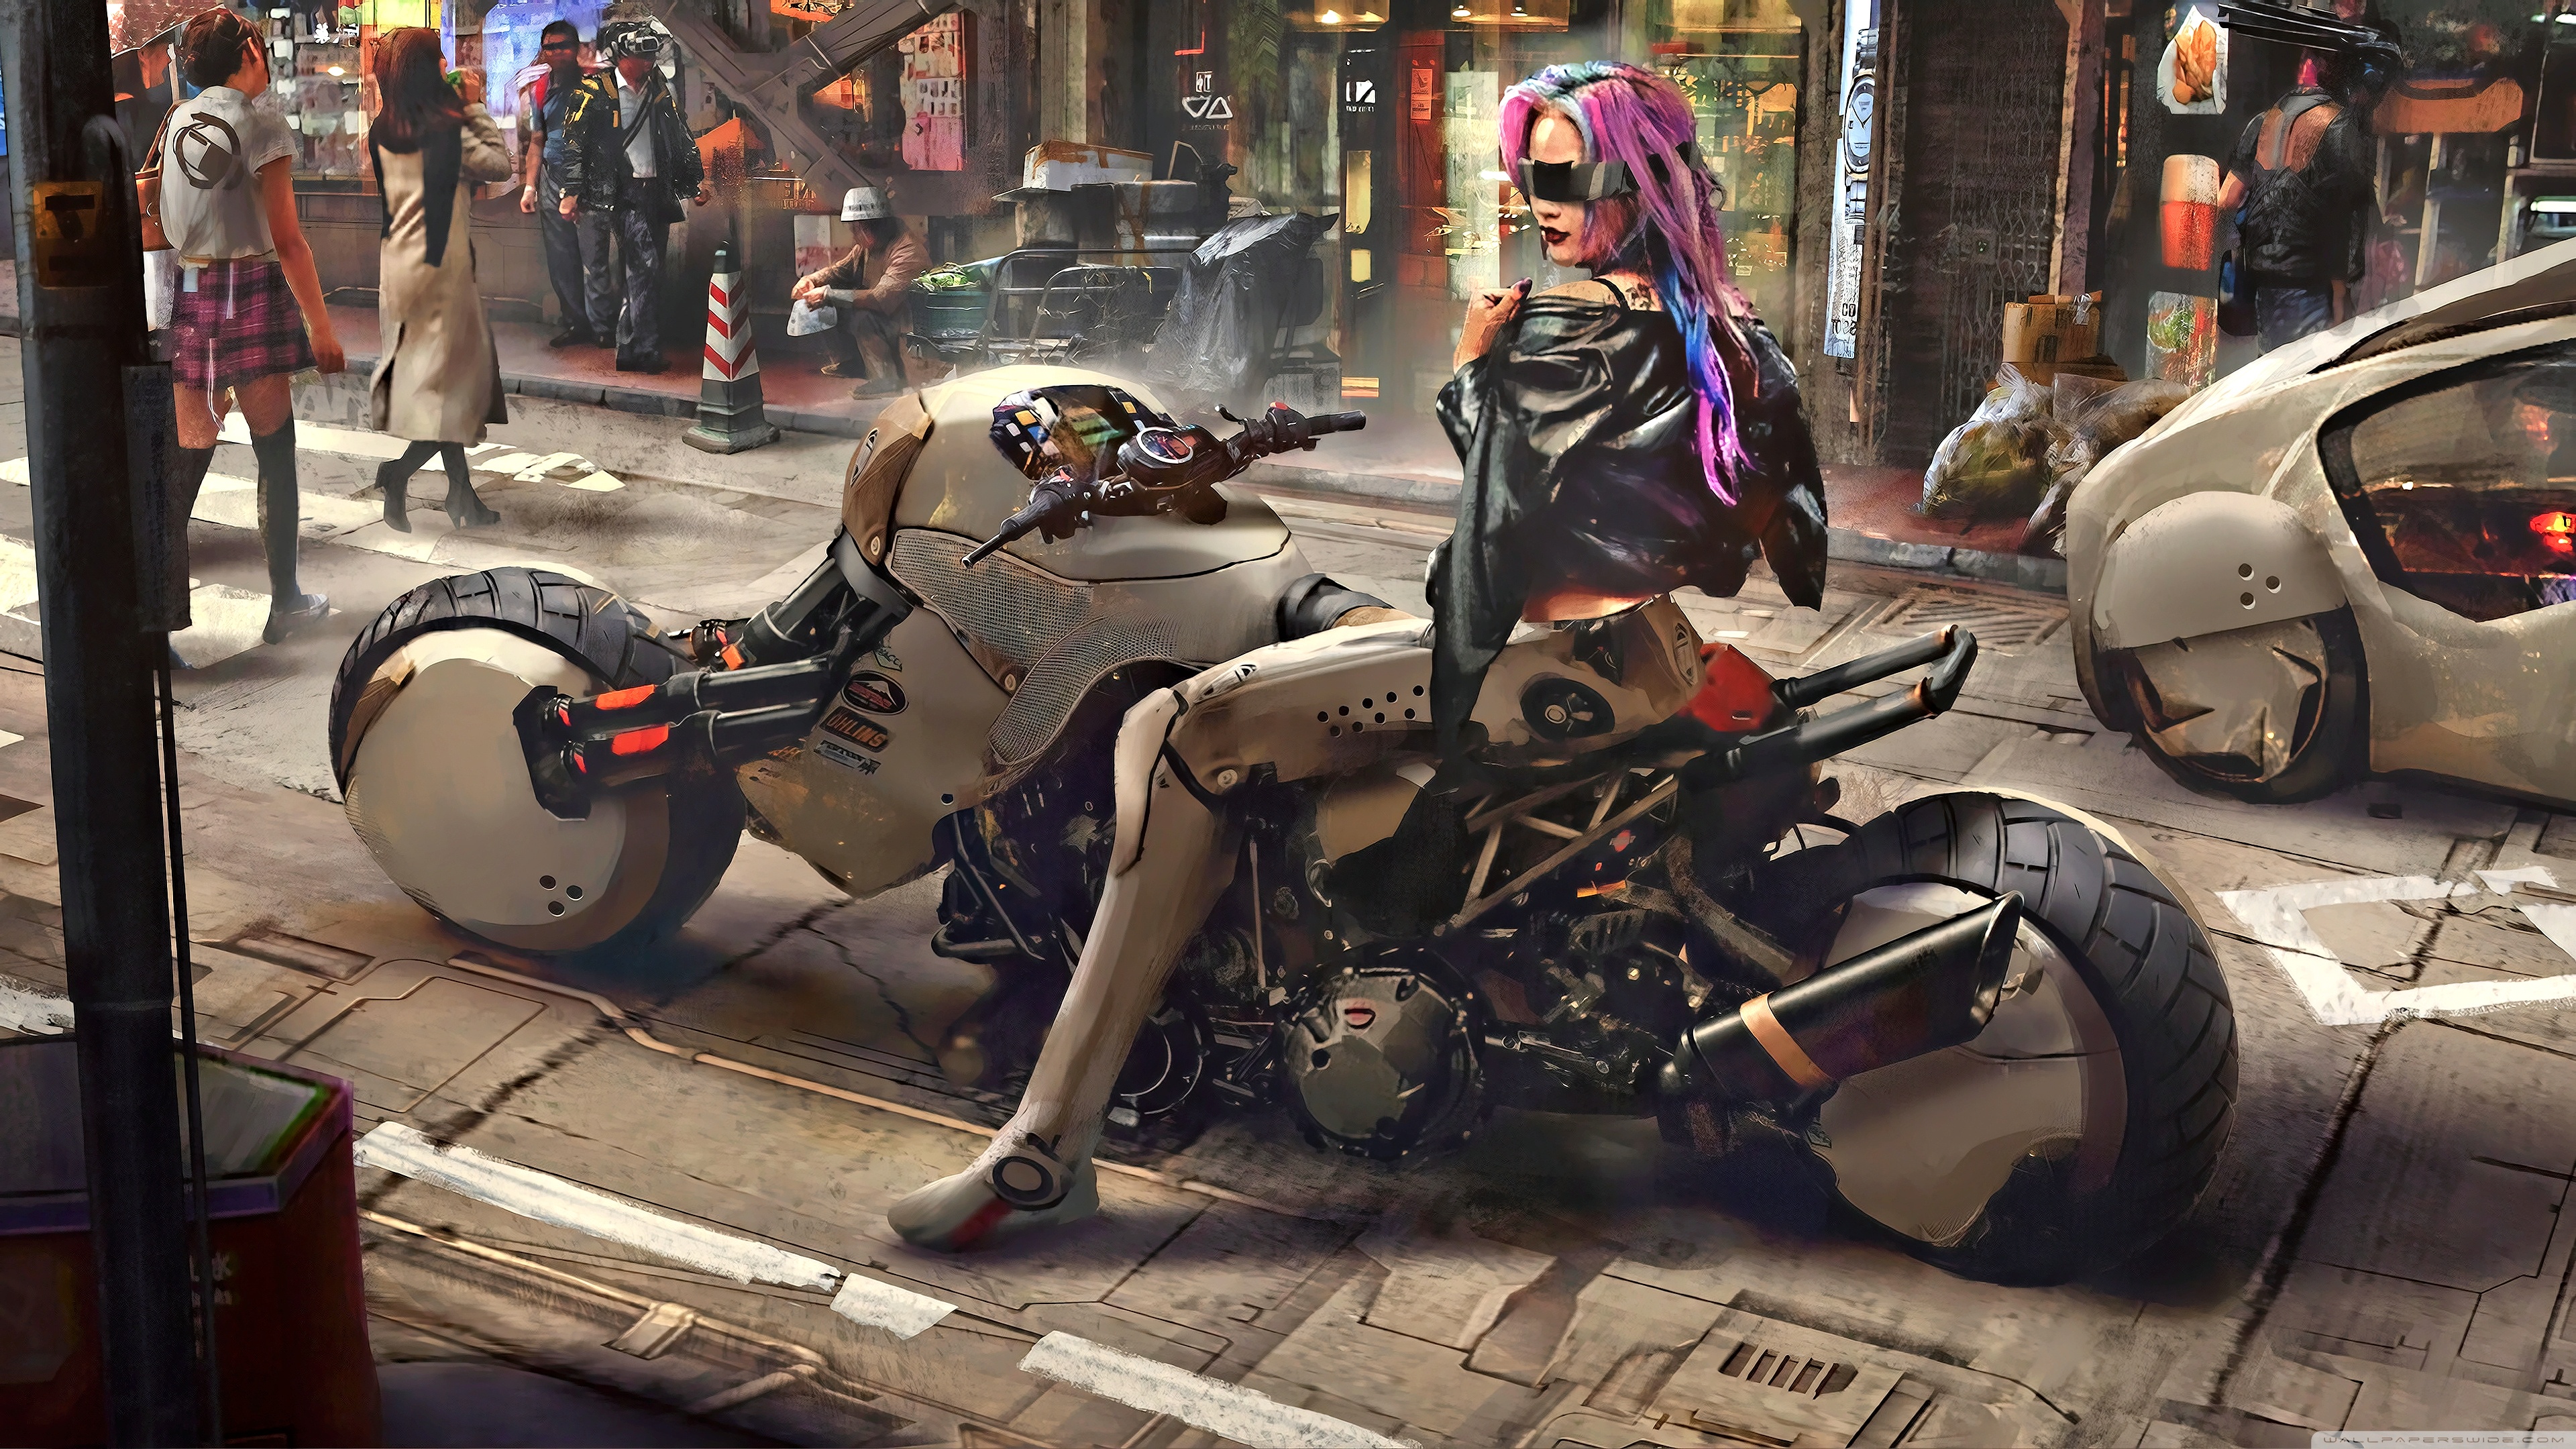 Cyberpunk 2077 Wallpaper 3440x1440 posted by Ethan Anderson